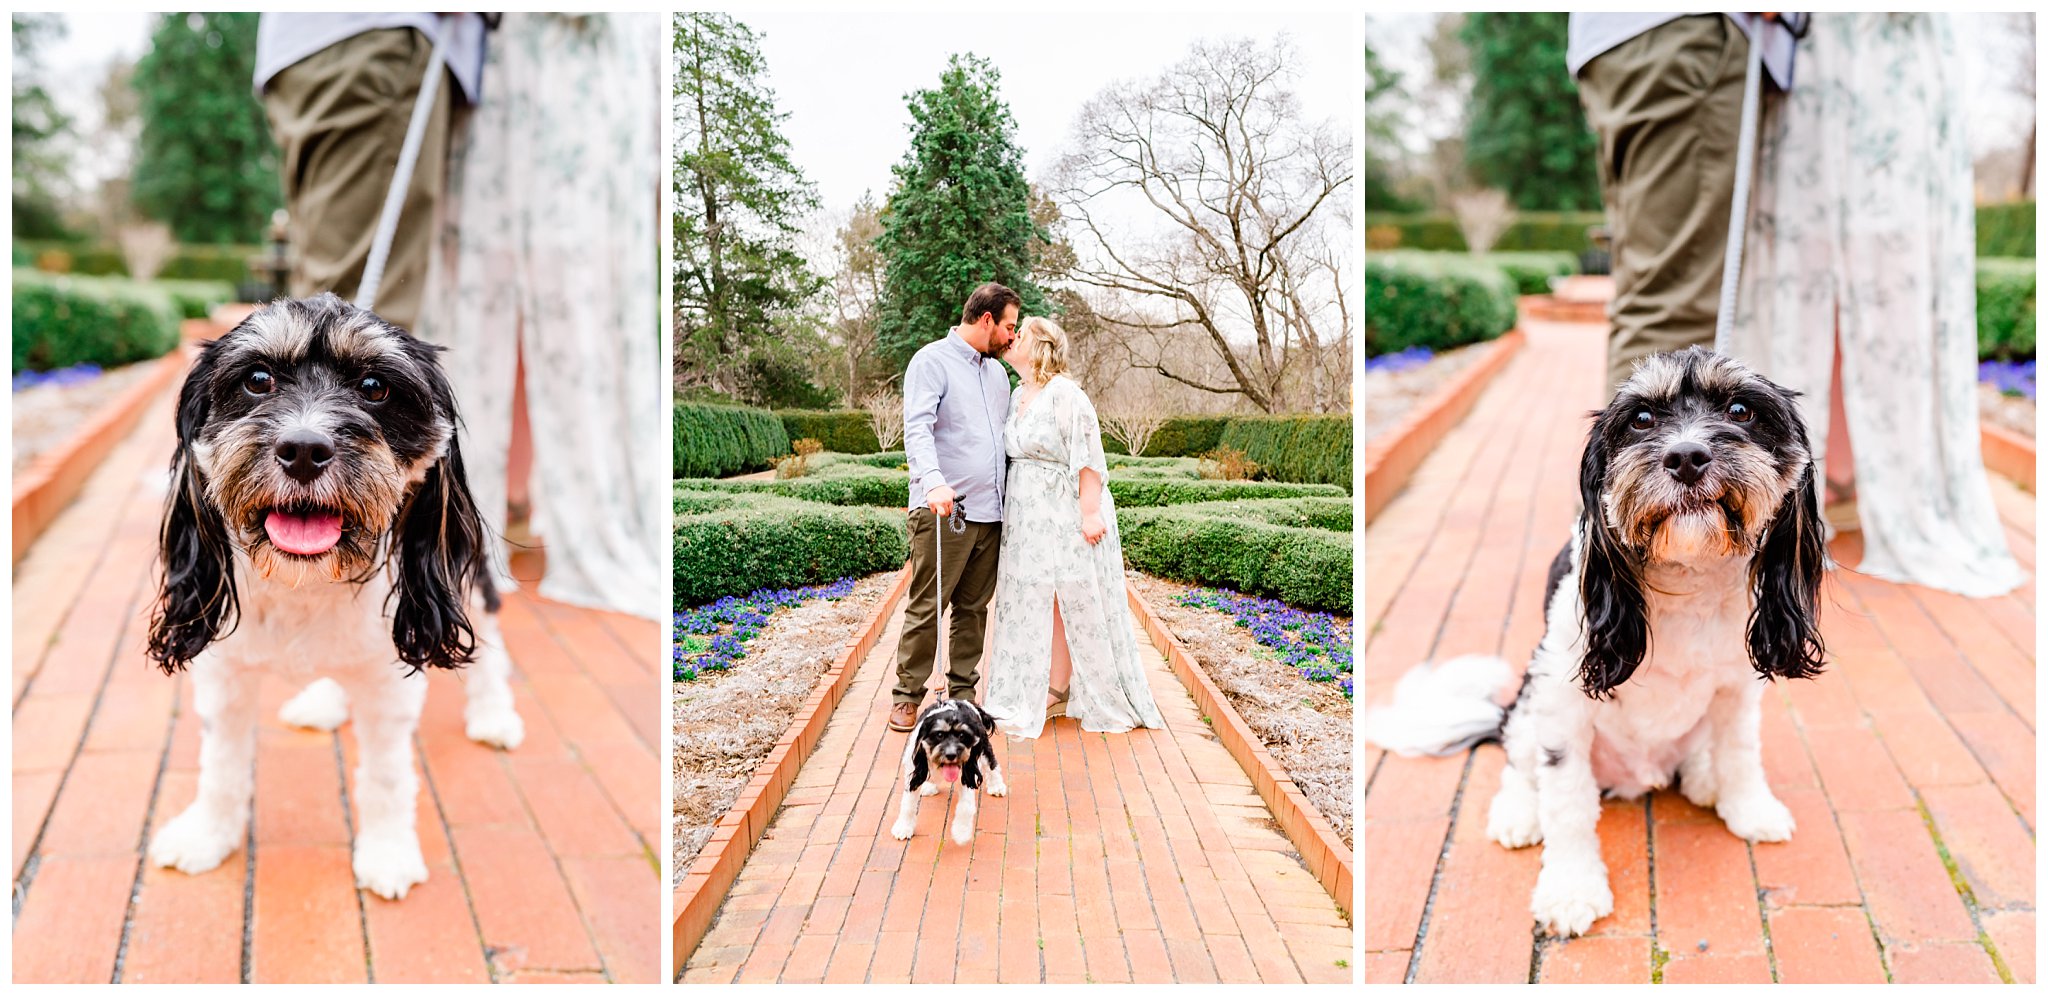 a couple and their small dog for their engagement session